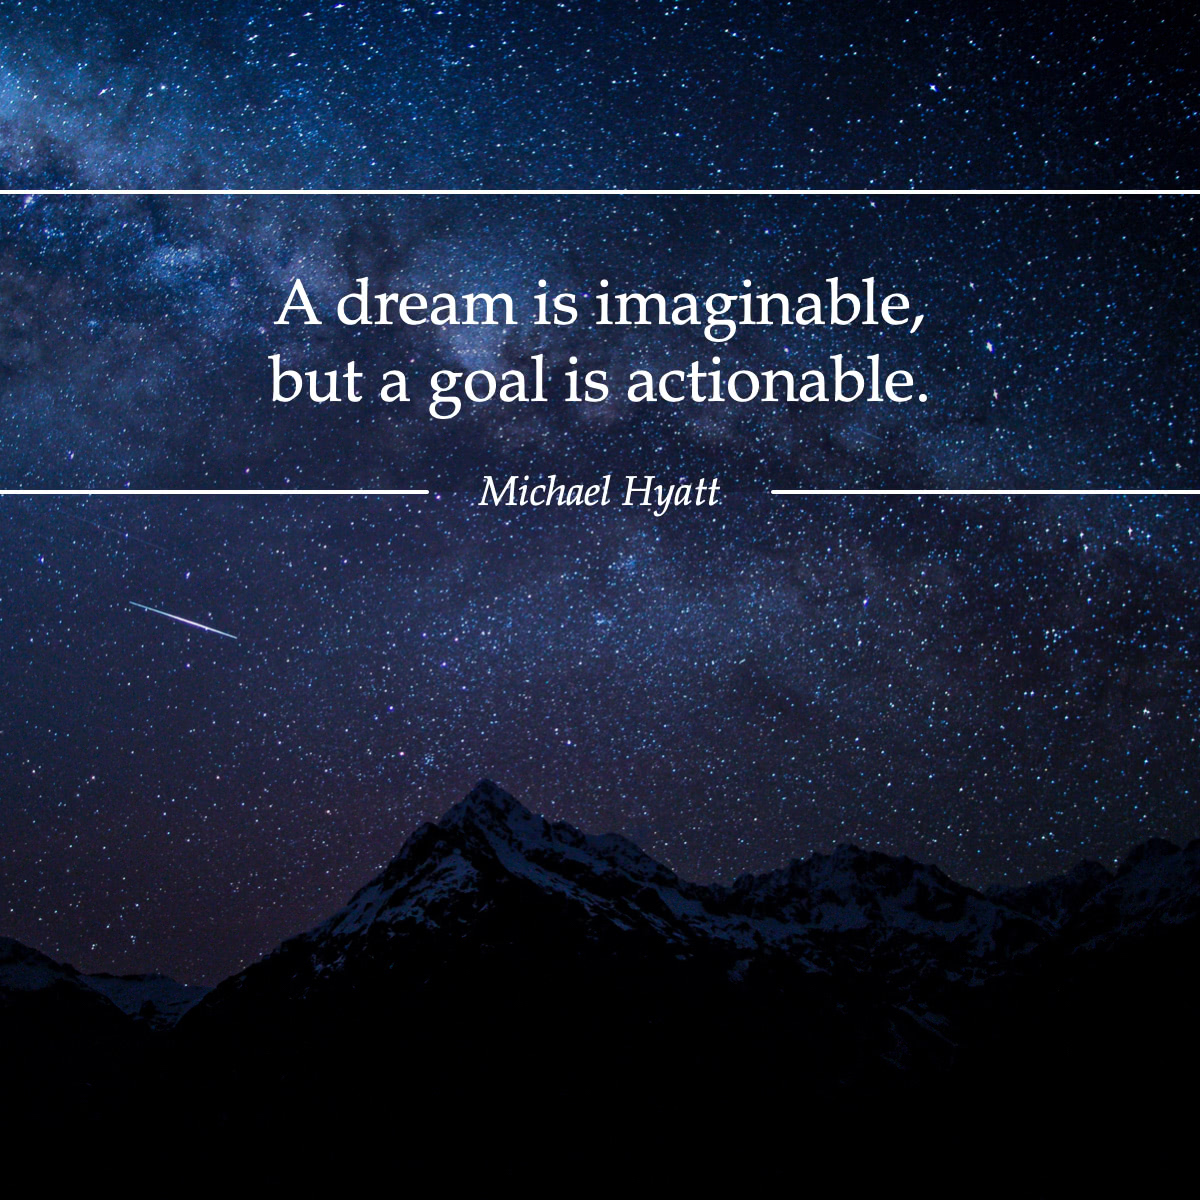 A dream is imaginable, but a goal is actionable. —Michael Hyatt